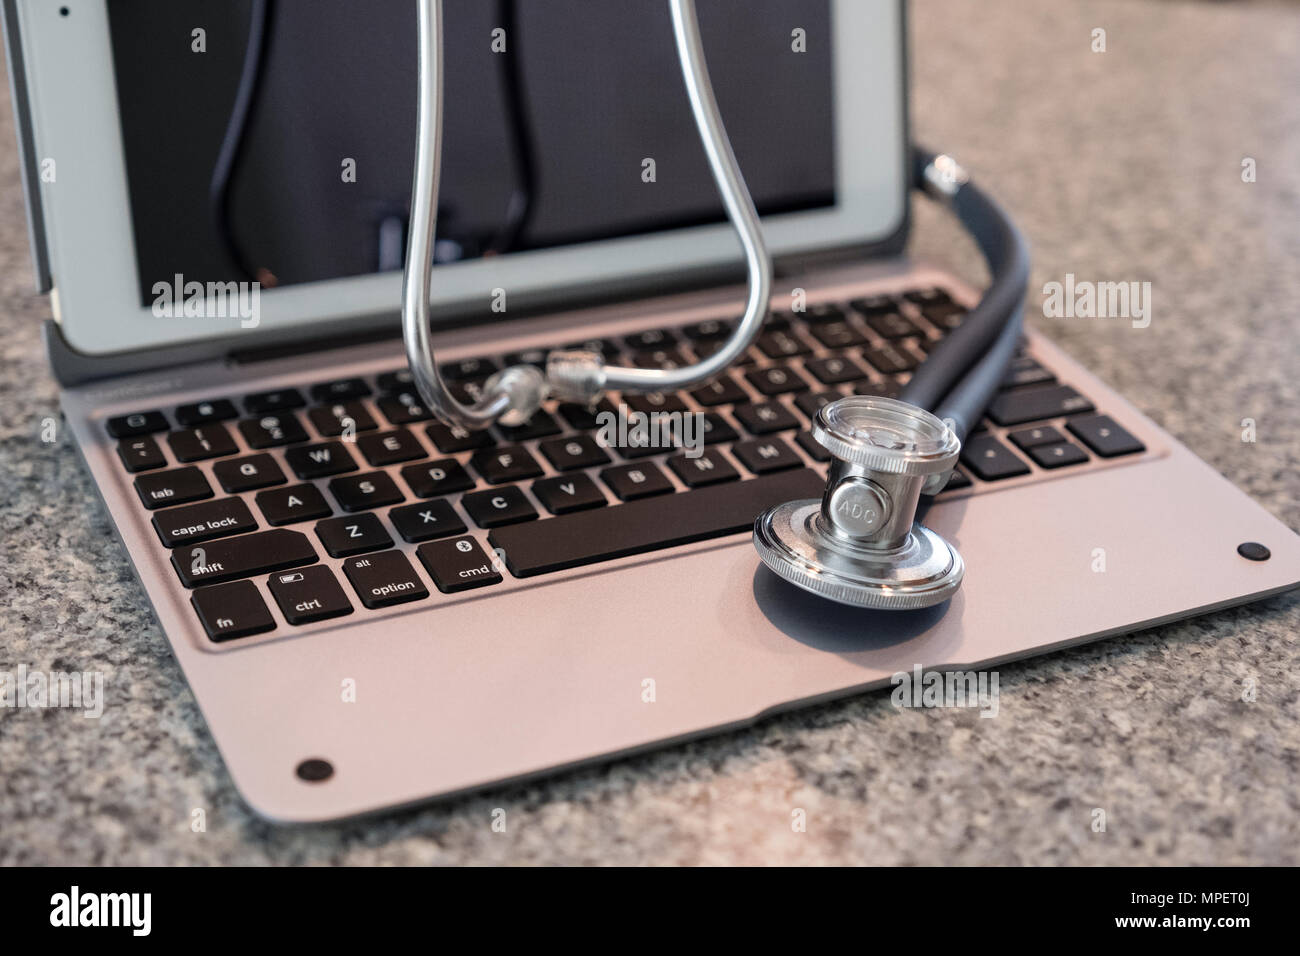 Stethoscope on keyboard countertop ready for use and data entry by medical professional Stock Photo